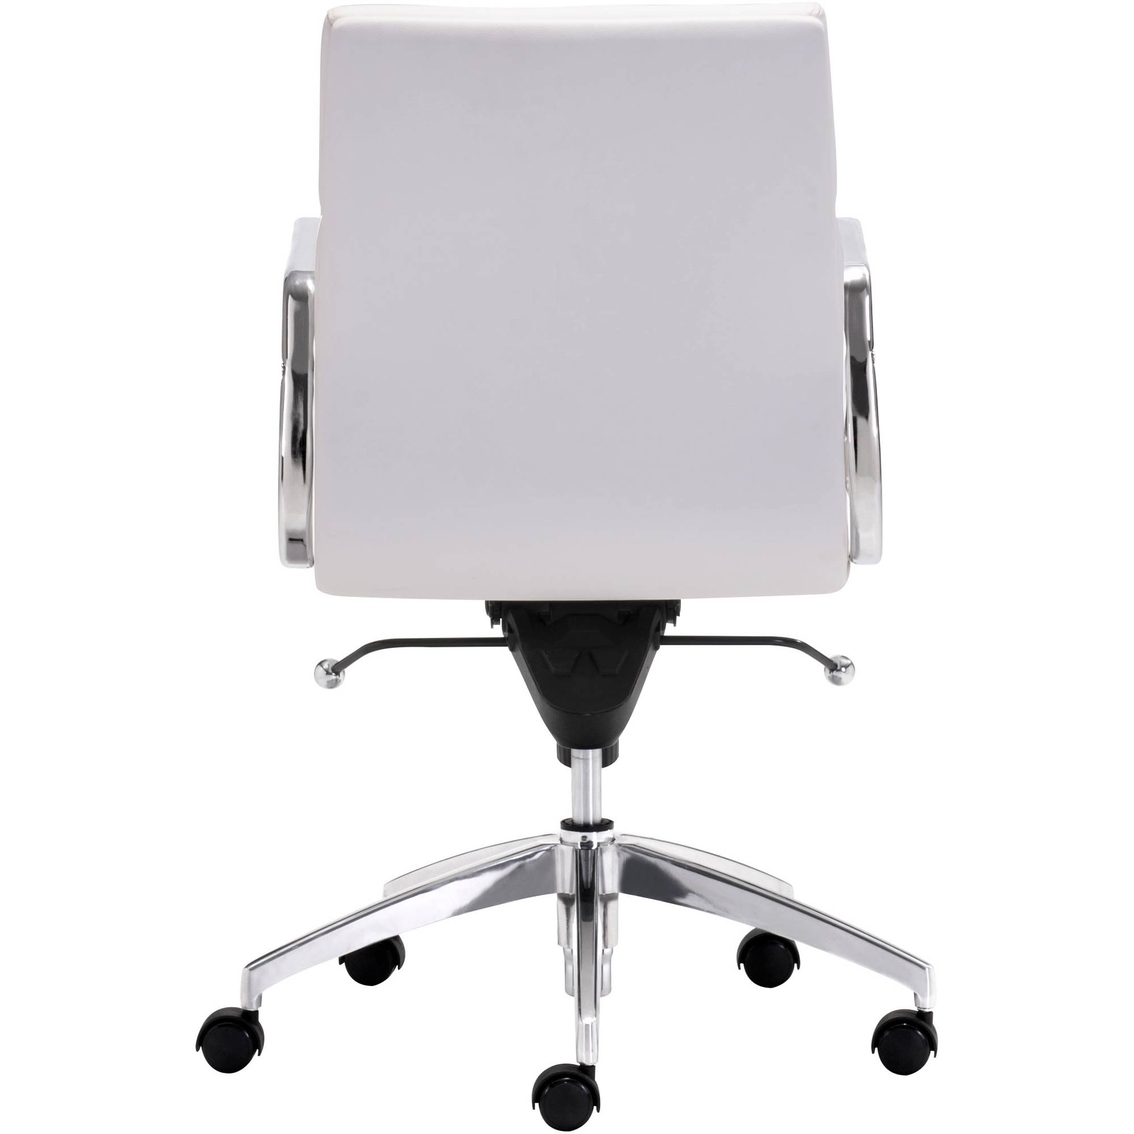 Zuo Modern Engineer Low Back Office Chair - Image 2 of 4